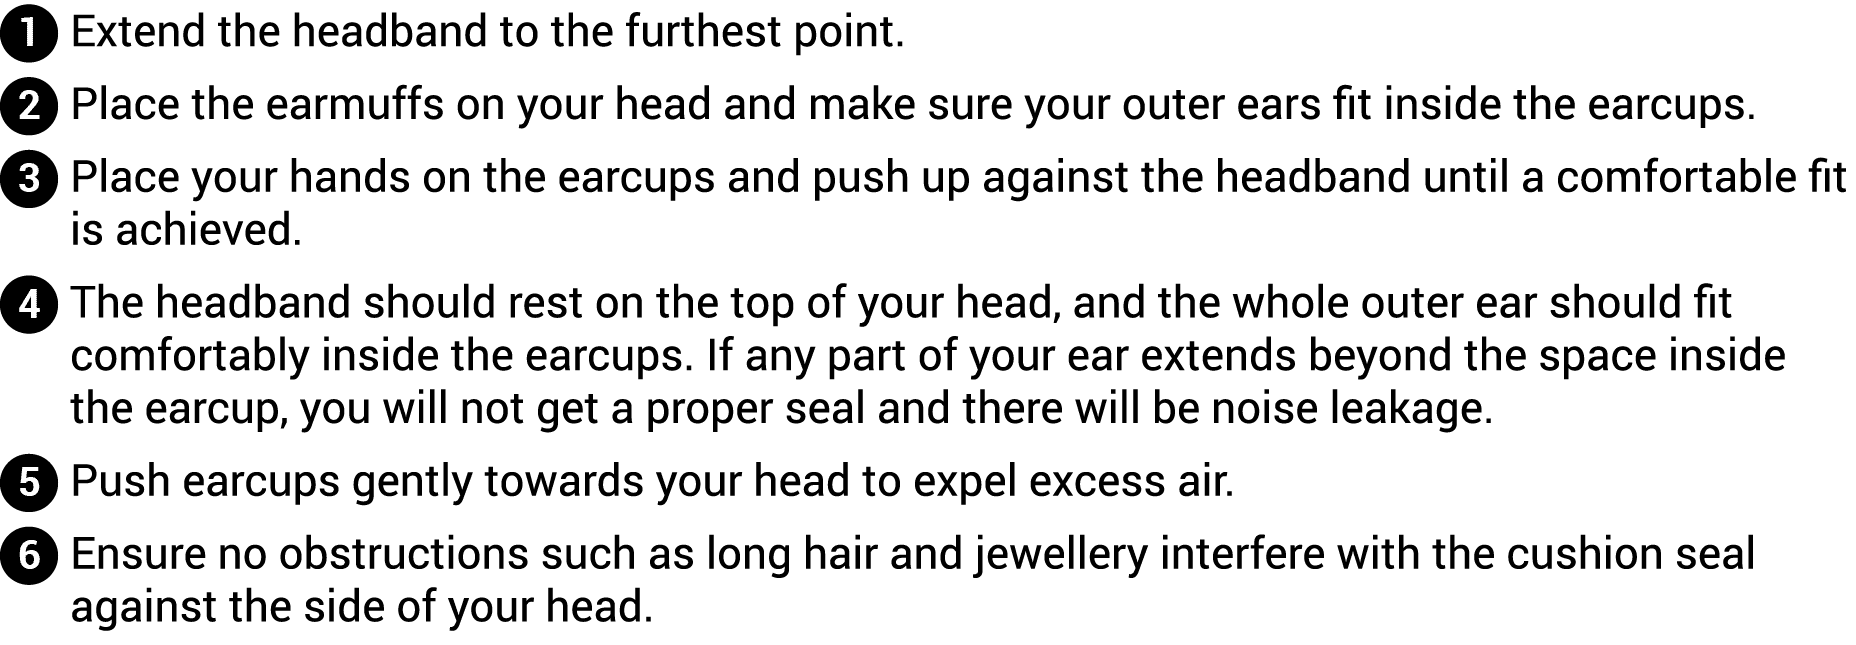  Extend the headband to the furthest point   Place the earmuffs on your head and make sure your outer ears fit inside   